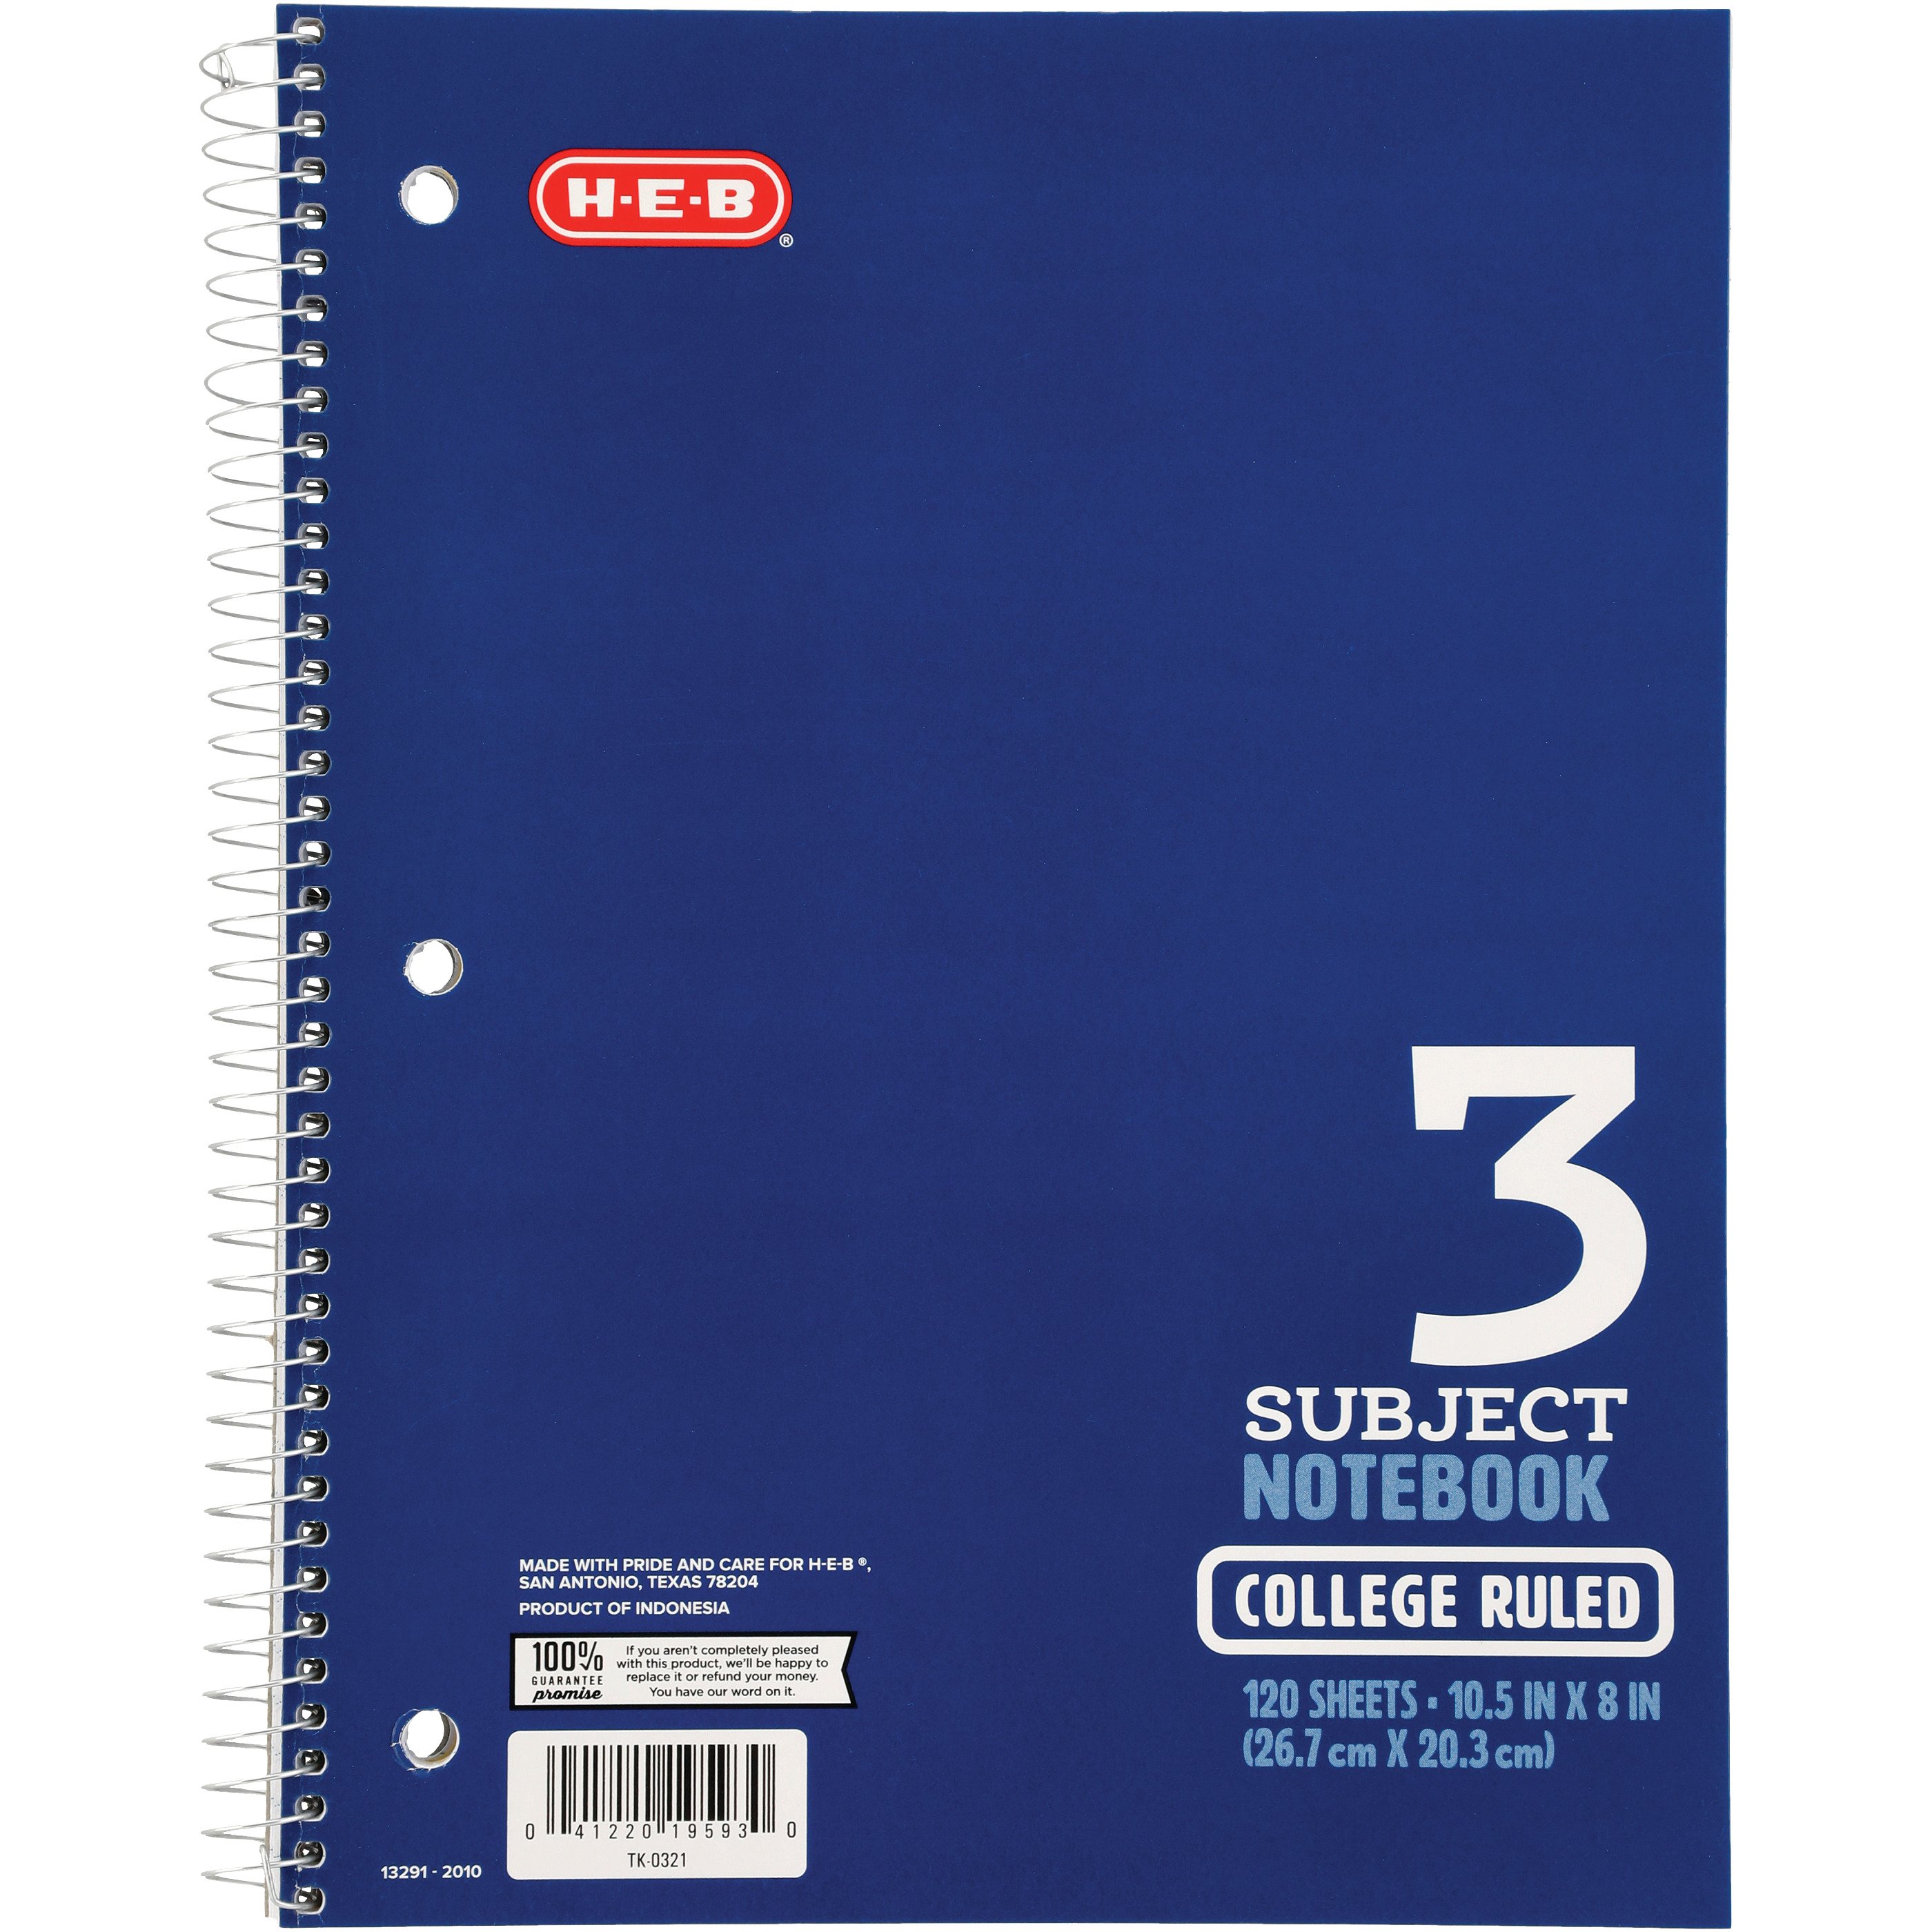 3-Subject Spiral Notebook Wide Ruled 120 sheets